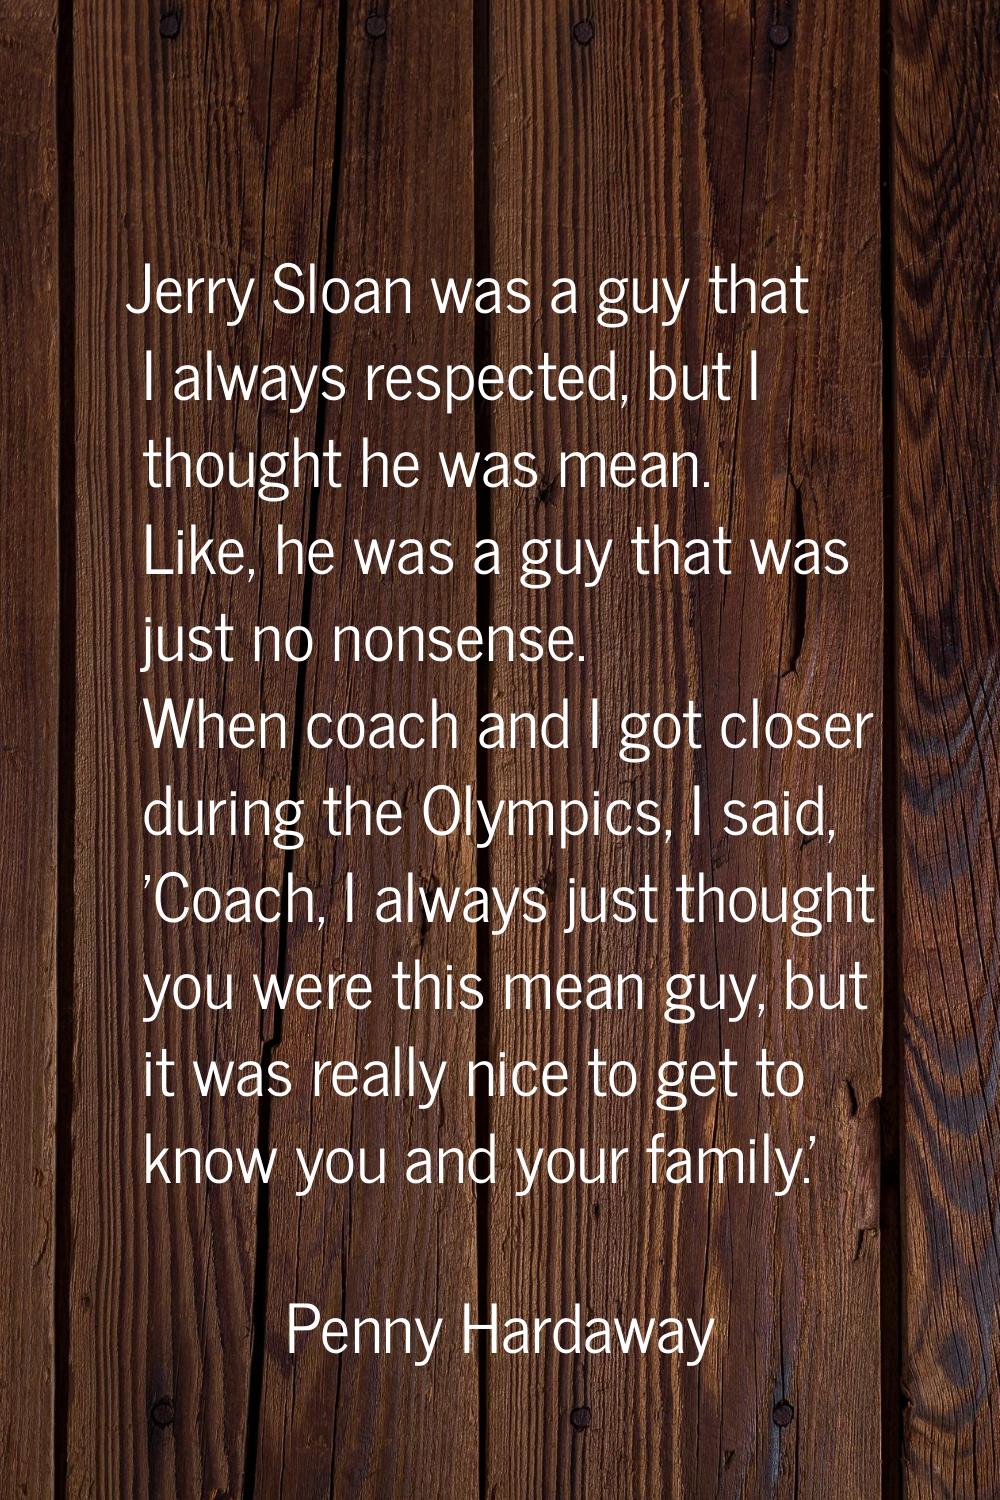 Jerry Sloan was a guy that I always respected, but I thought he was mean. Like, he was a guy that w